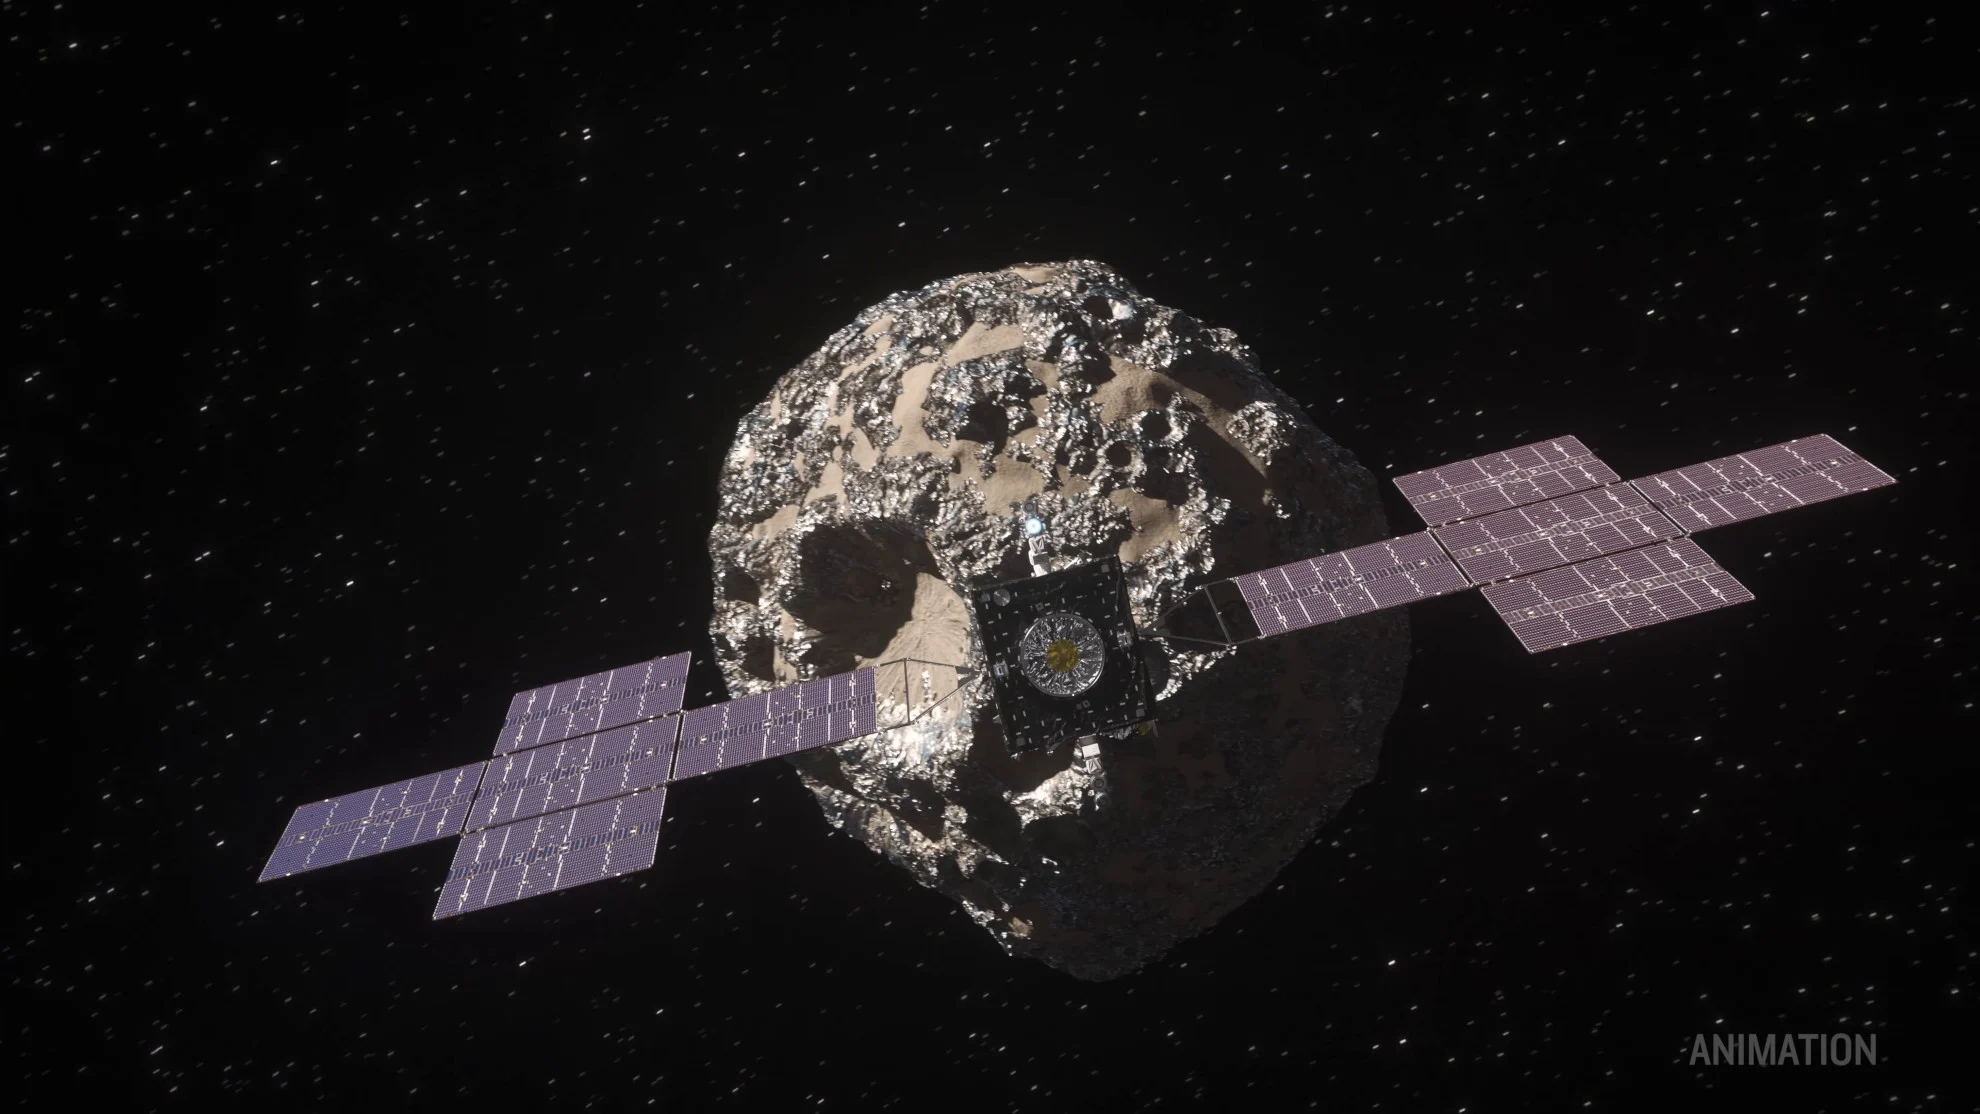 NASA Psyche arrives at metal asteroid 16 Psyche - animation